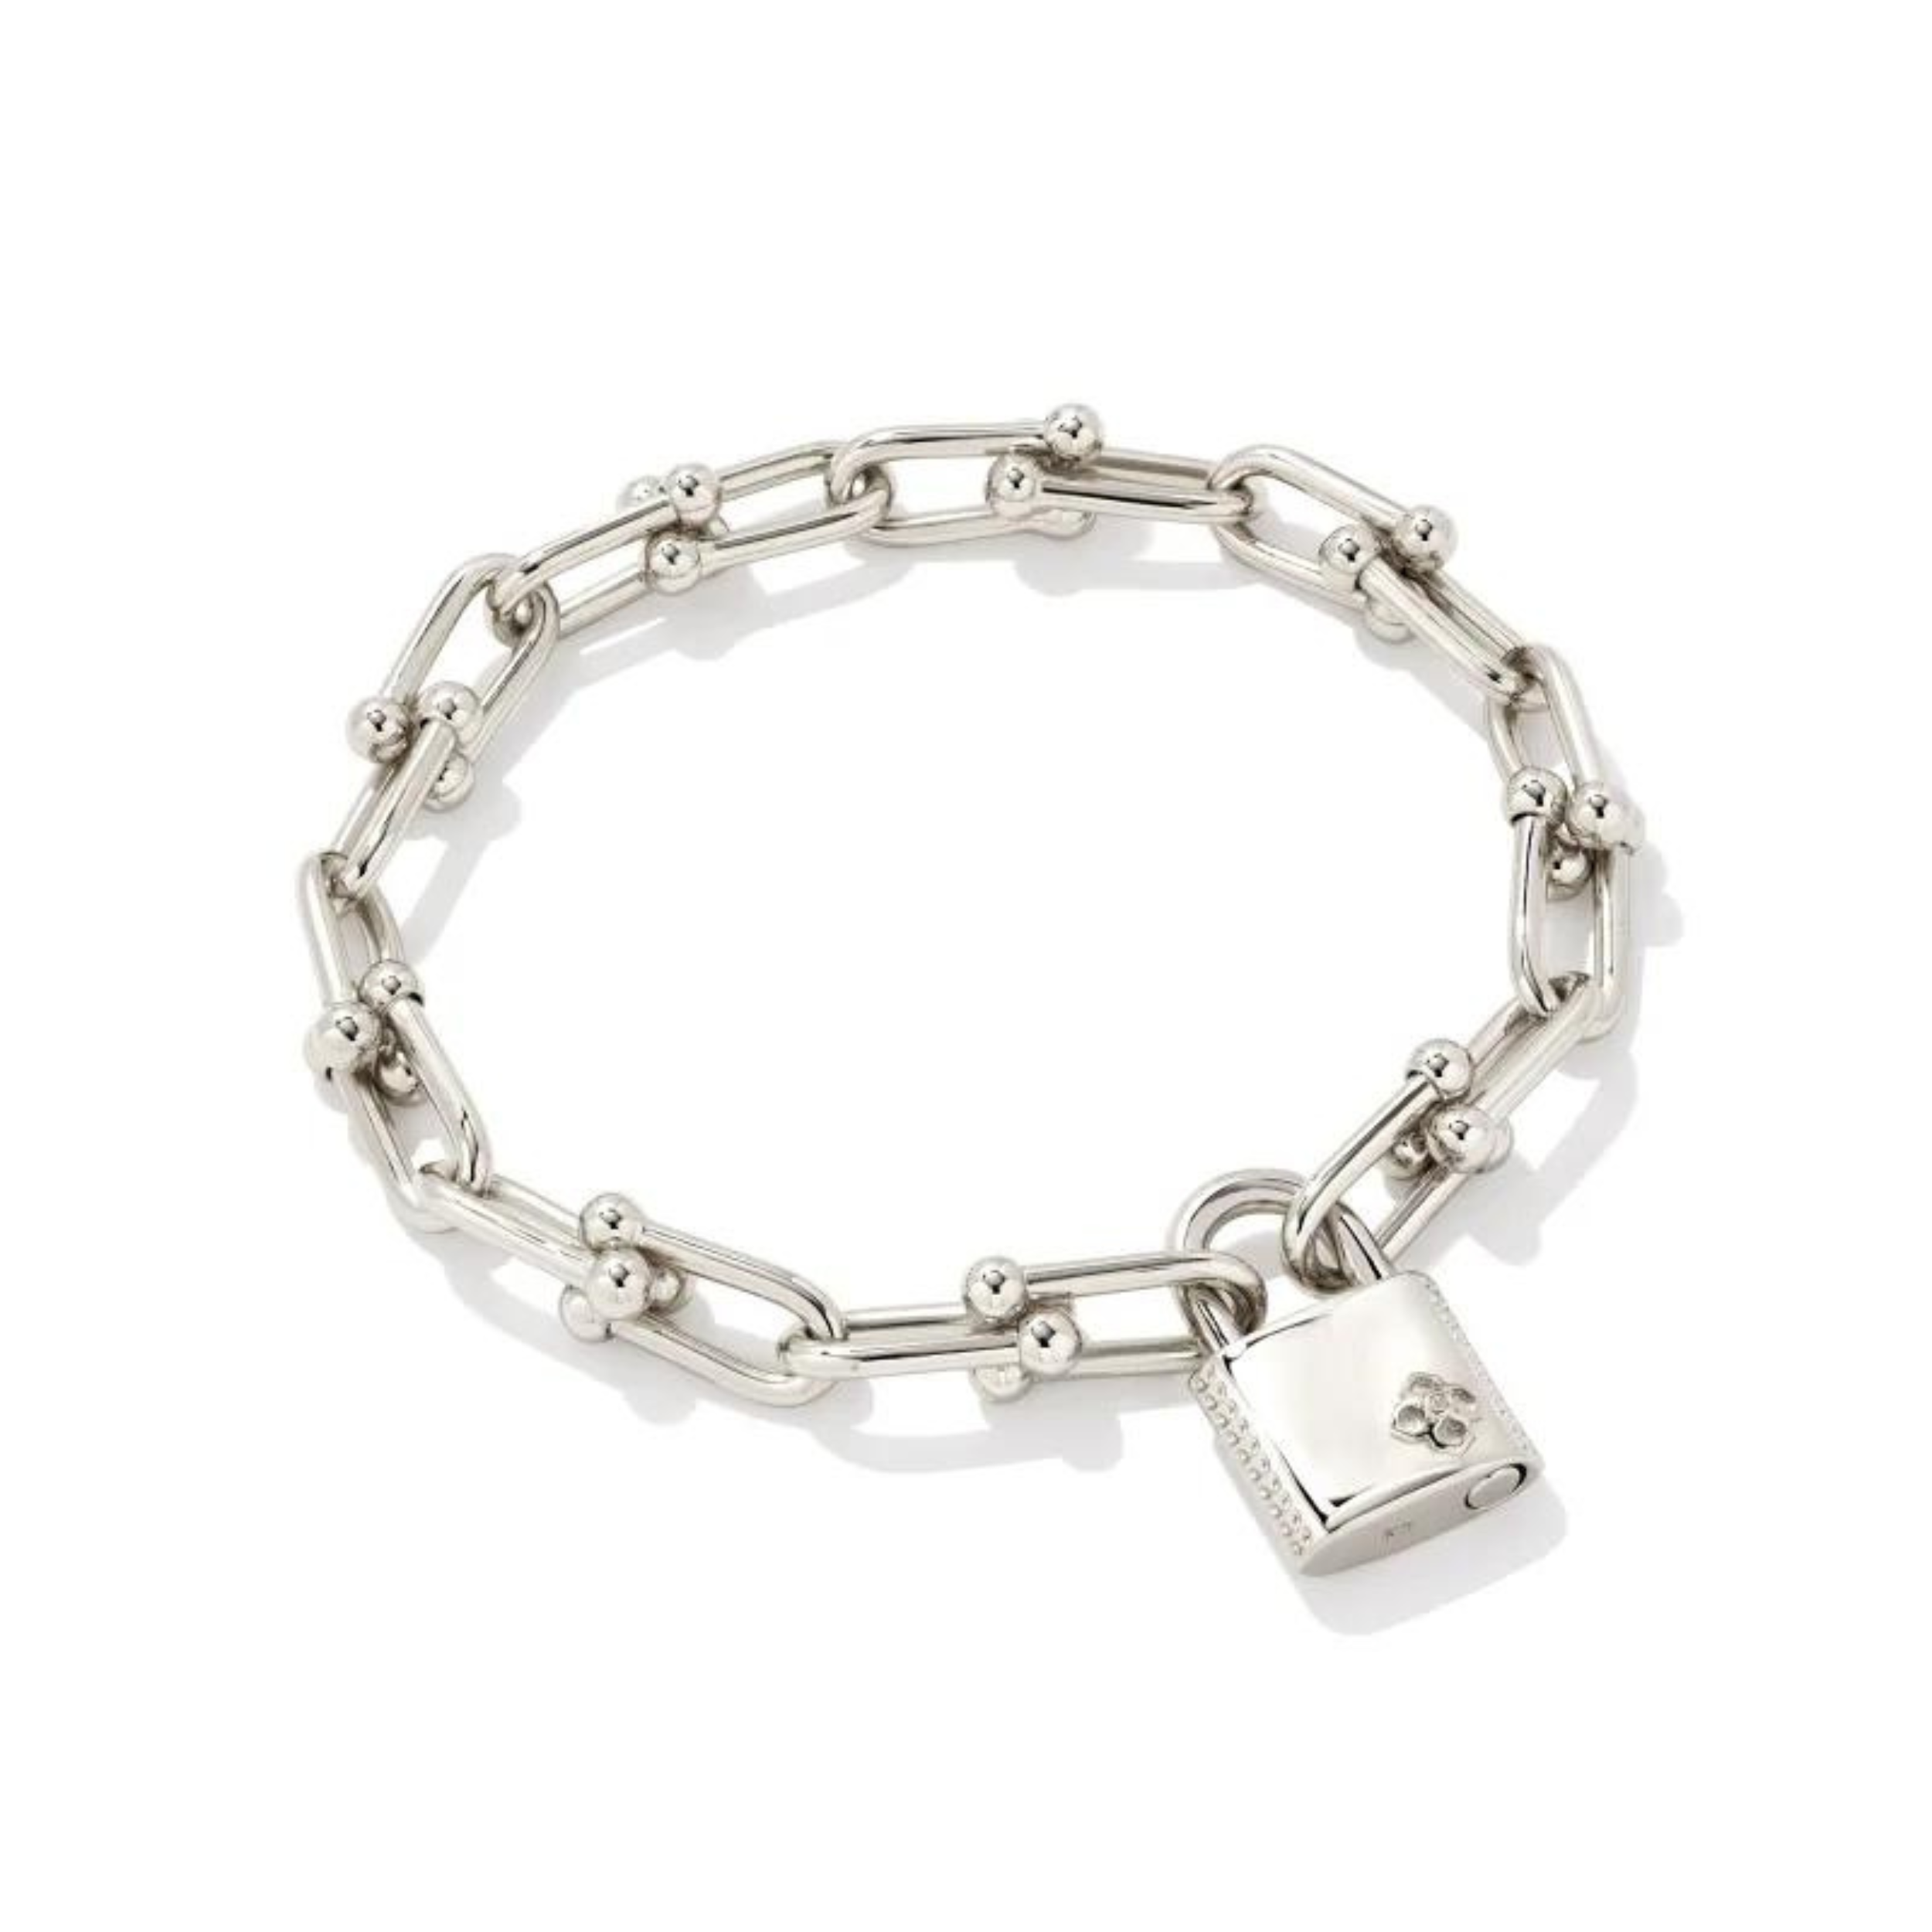 Silver chain link bracelet with lock pendant, pictured on a white background.